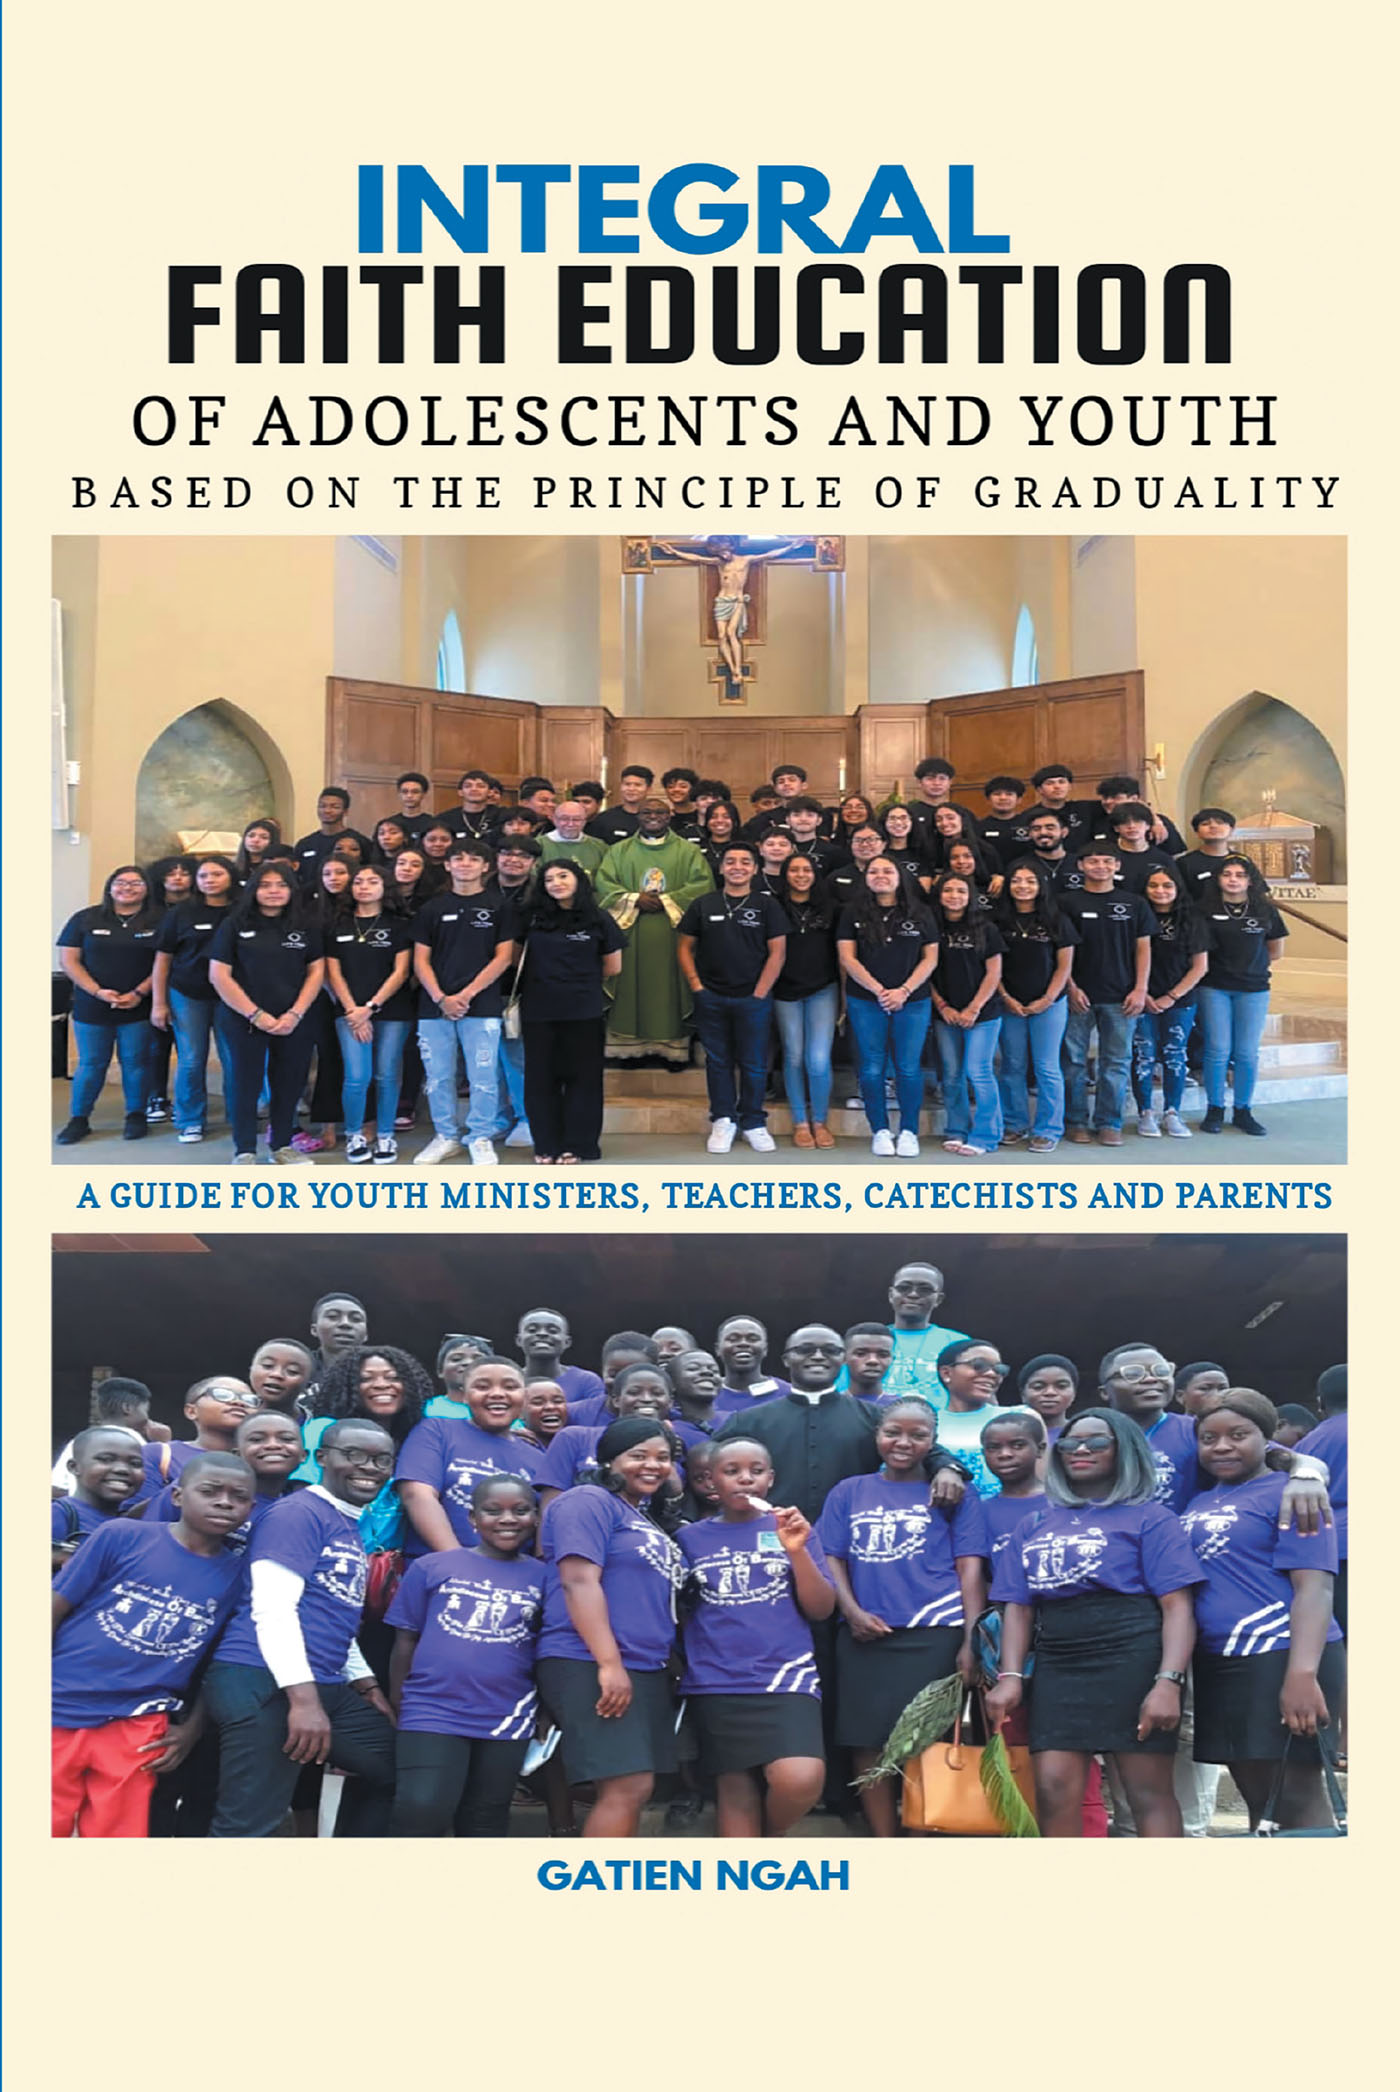 Gatien Ngah’s Newly Released "Integral Faith Education of Adolescents & Youth Based on the Principle of Graduality" is a Helpful Resource for All Faith Educators